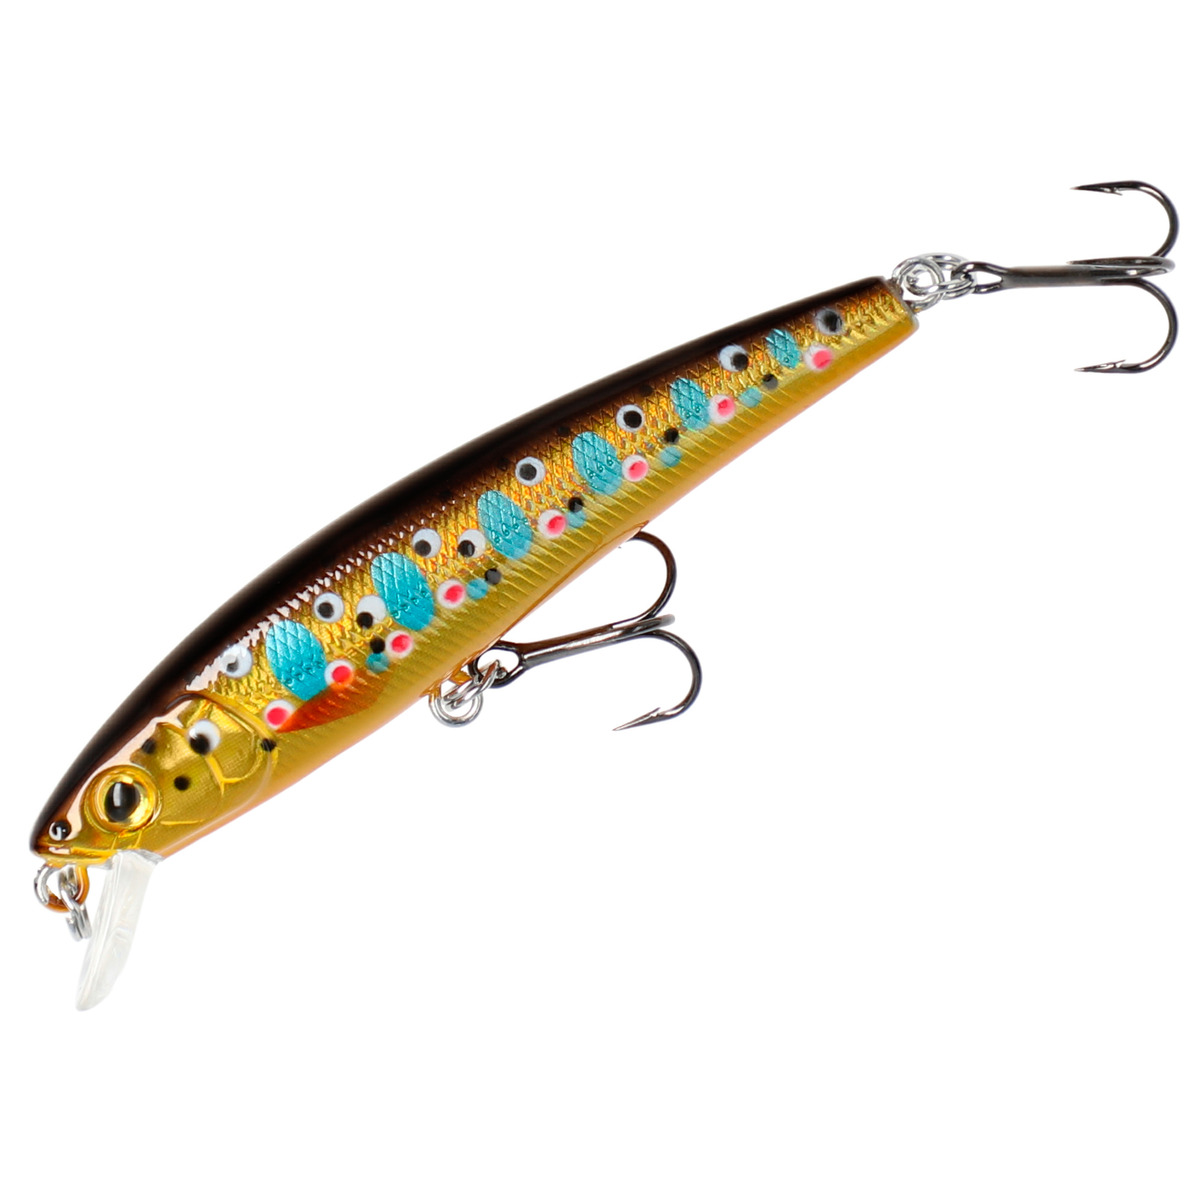 Mikado Fishunter Needle - 7.5 cm / BROWN TROUT   FLOATING